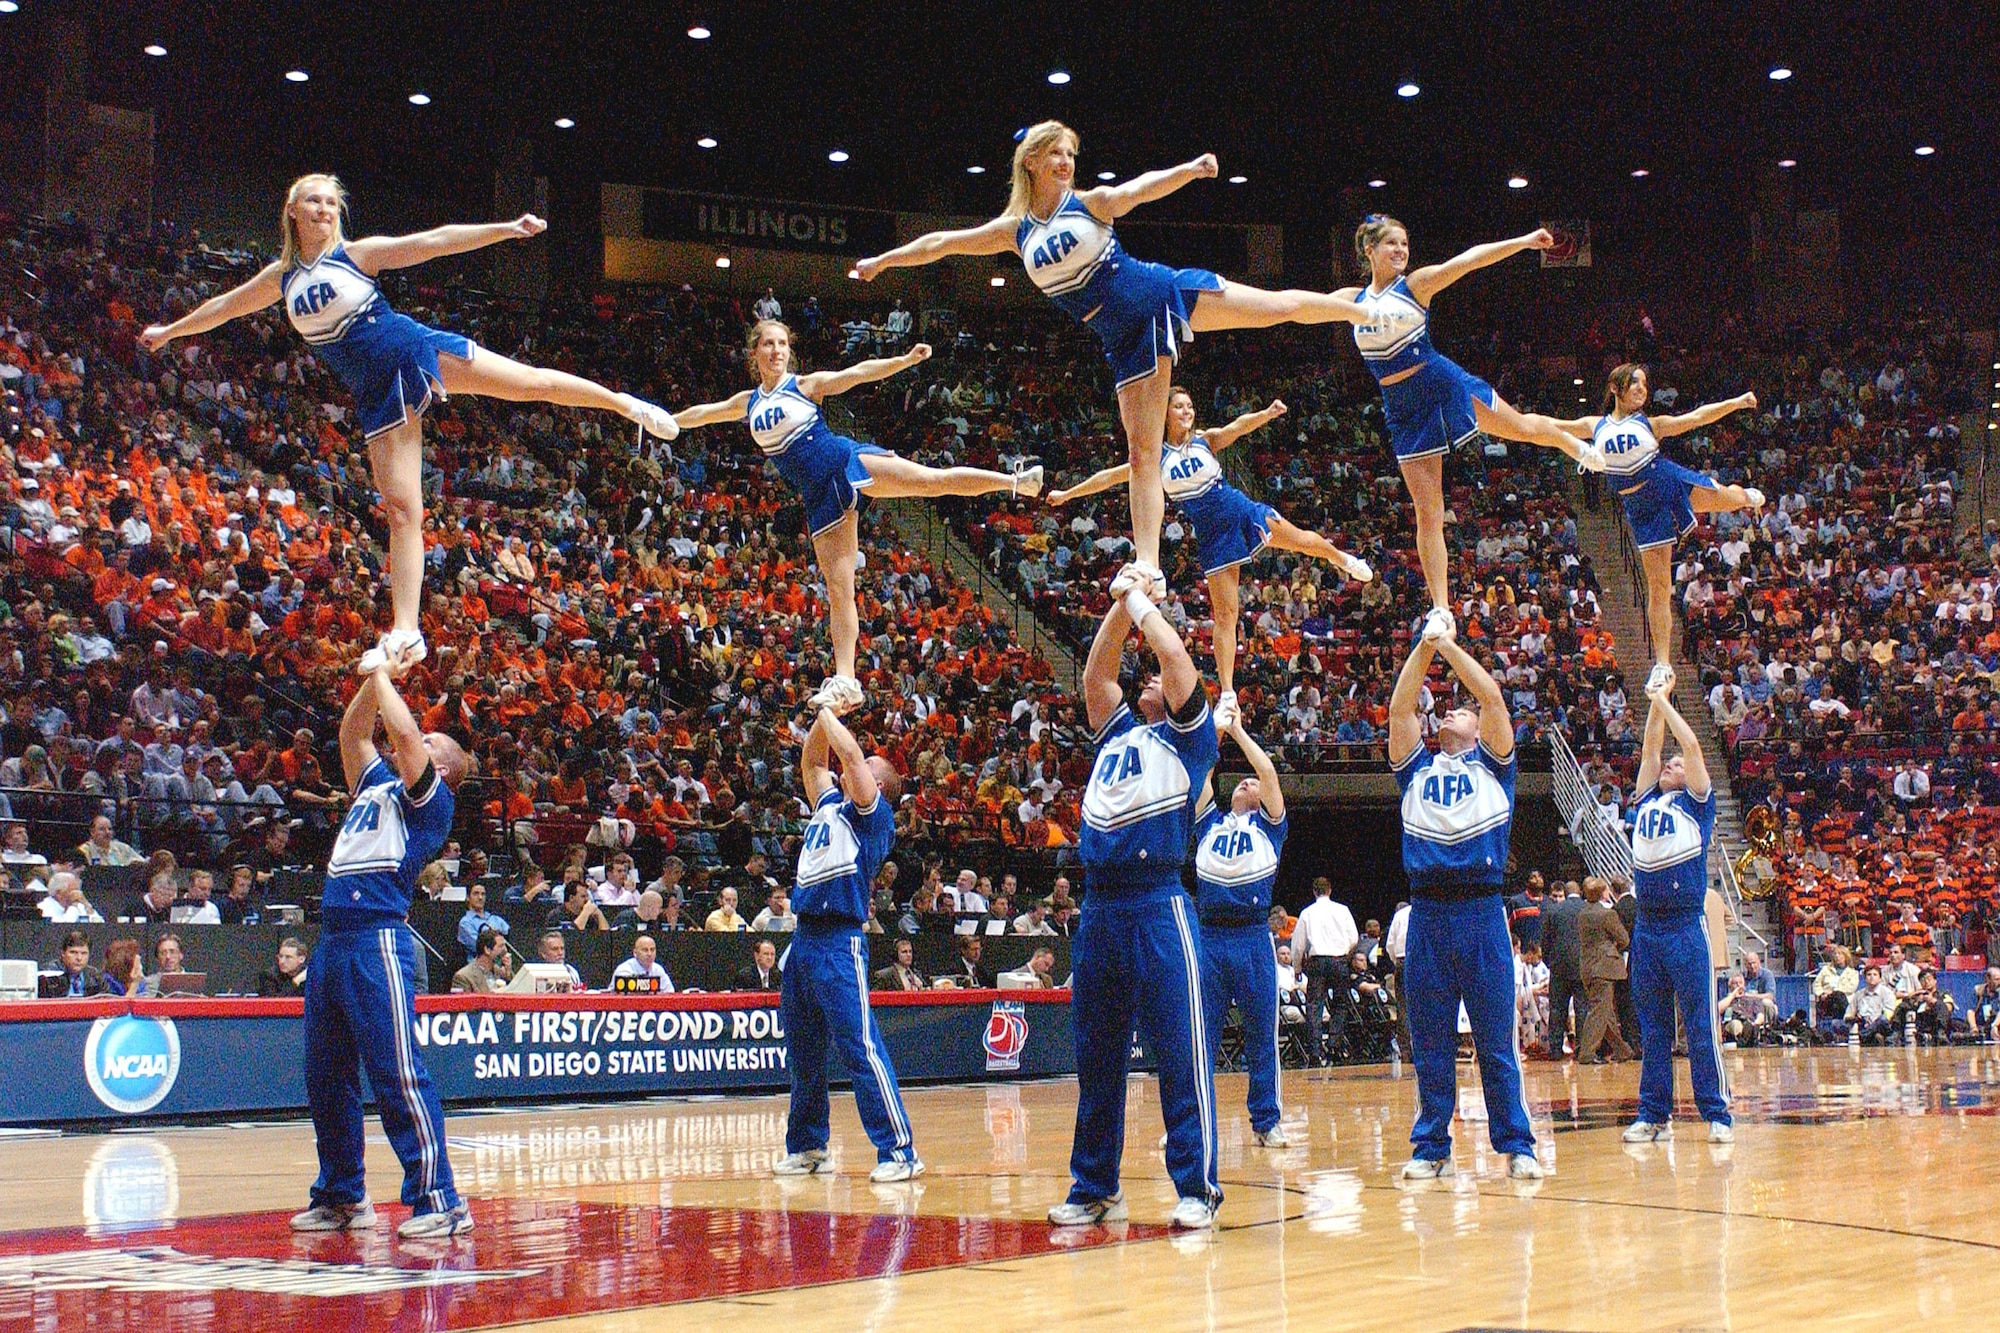 Air Force cheerleaders entertain the crowd at Cox Arena in San Diego, Calif., during a break in the NCAA Tournament game Thursday, March 16, 2006, between the Falcons and Illinois. (U.S. Air Force photo/Danny Meyer) 

